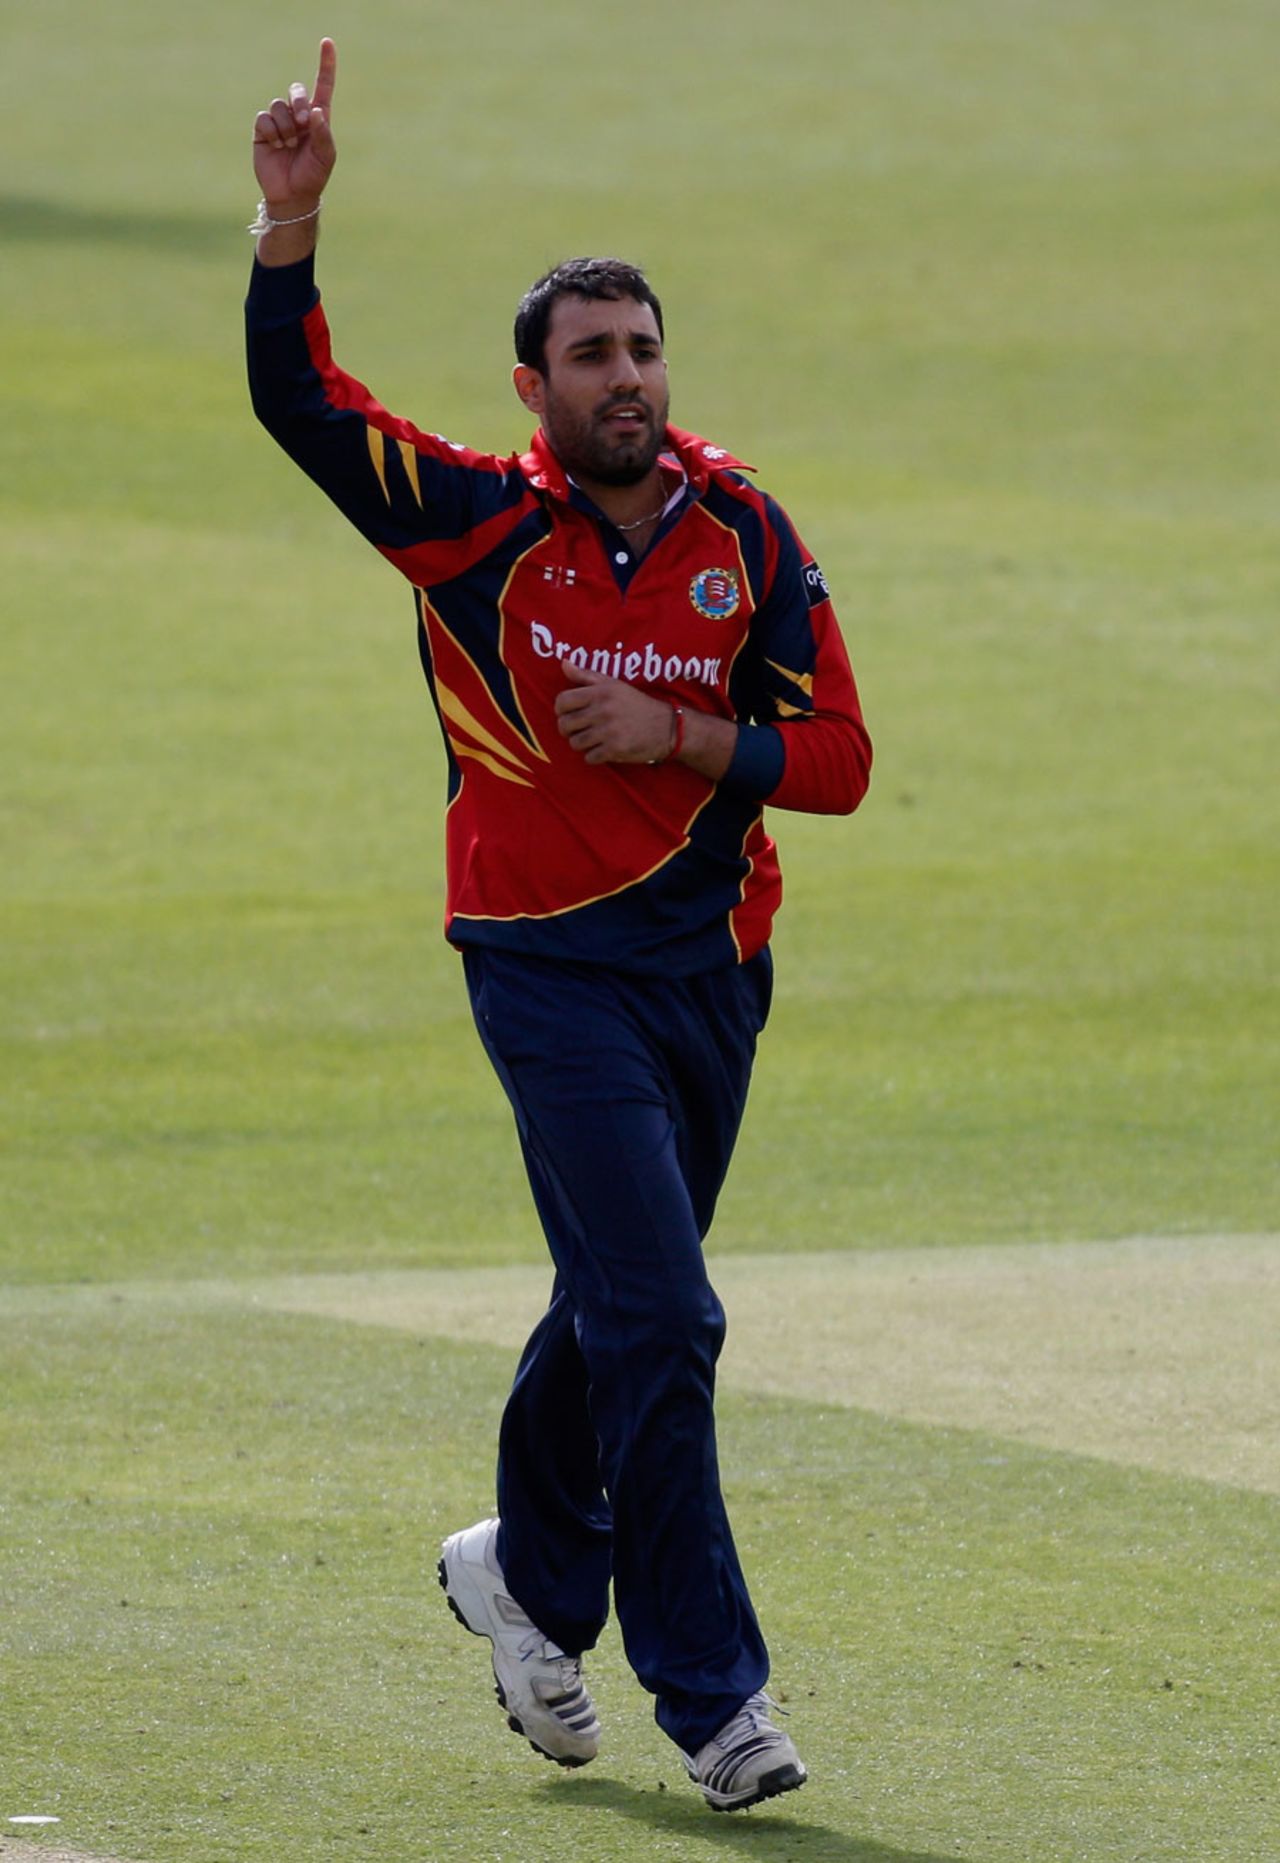 Ravi Bopara celebrates one of his three wickets, Middlesex v Essex, CB40 Group A, Lord's, August 27, 2012